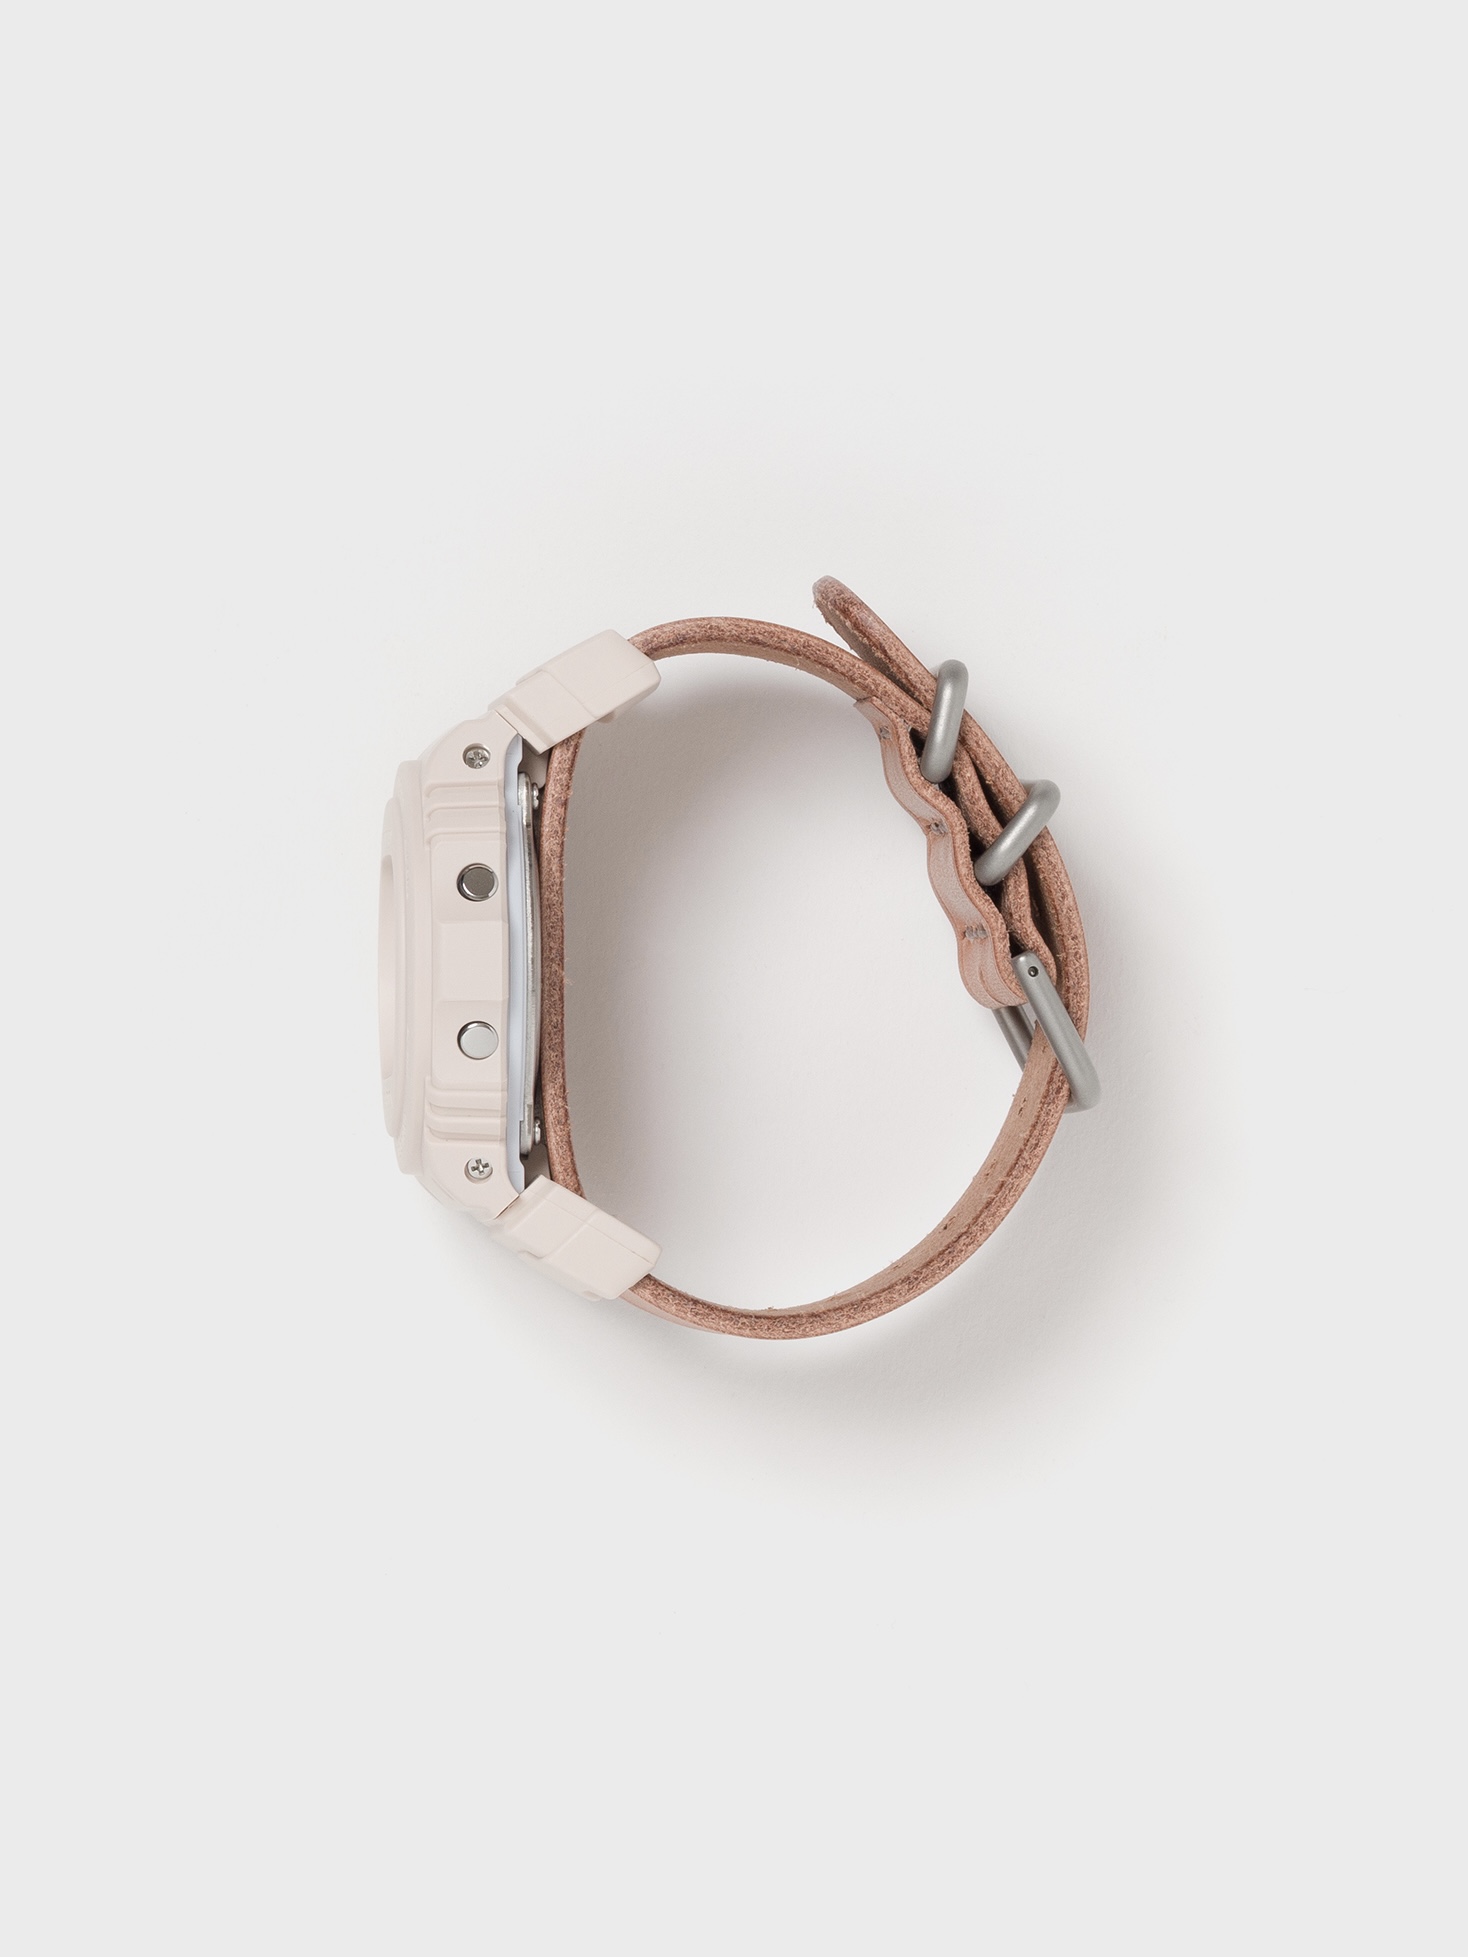 Hender Scheme and G-SHOCK collaborate to create a round-faced watch ...